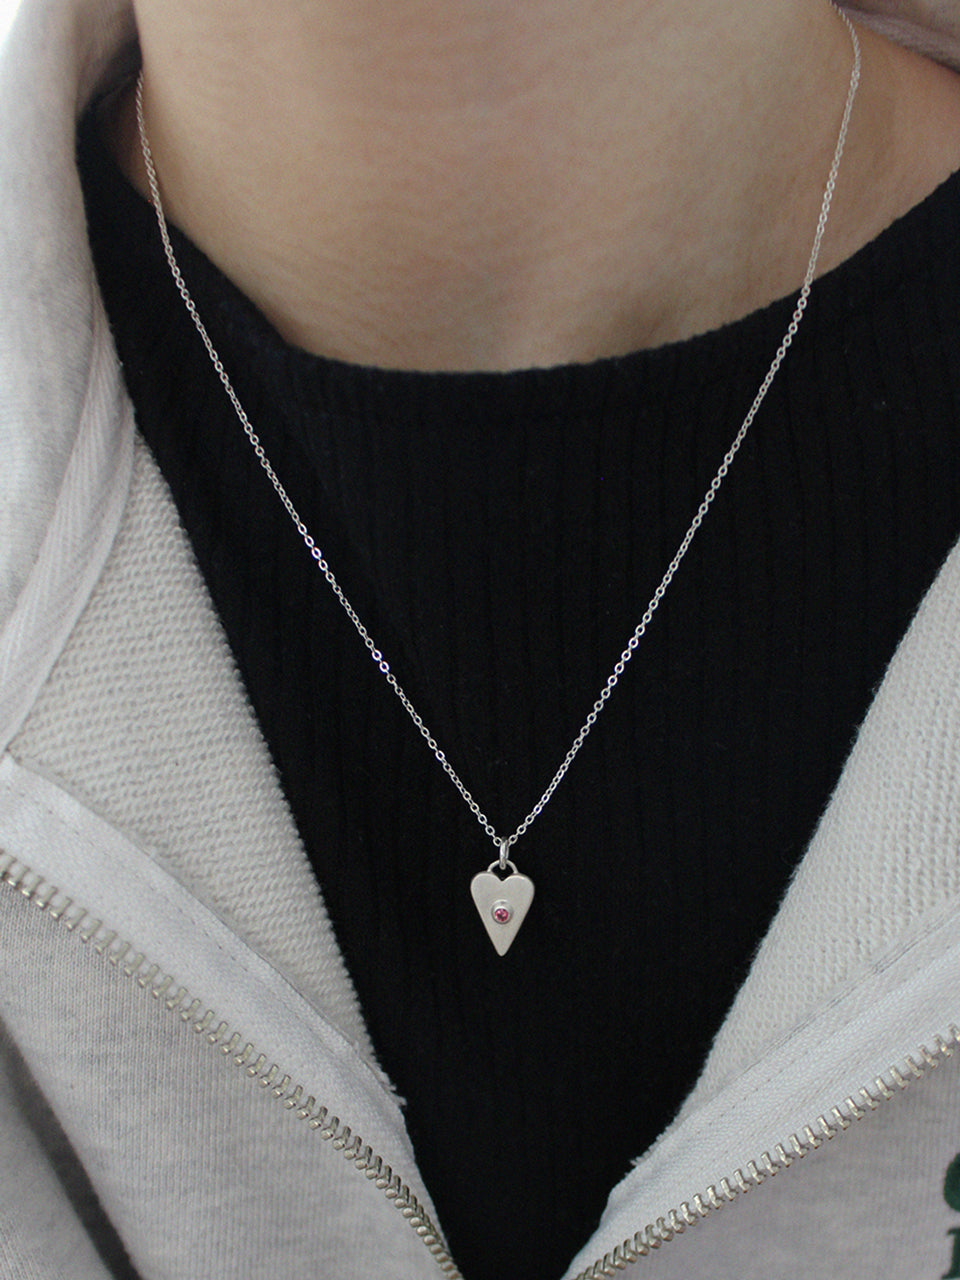 【MADE】 vintage heart necklace